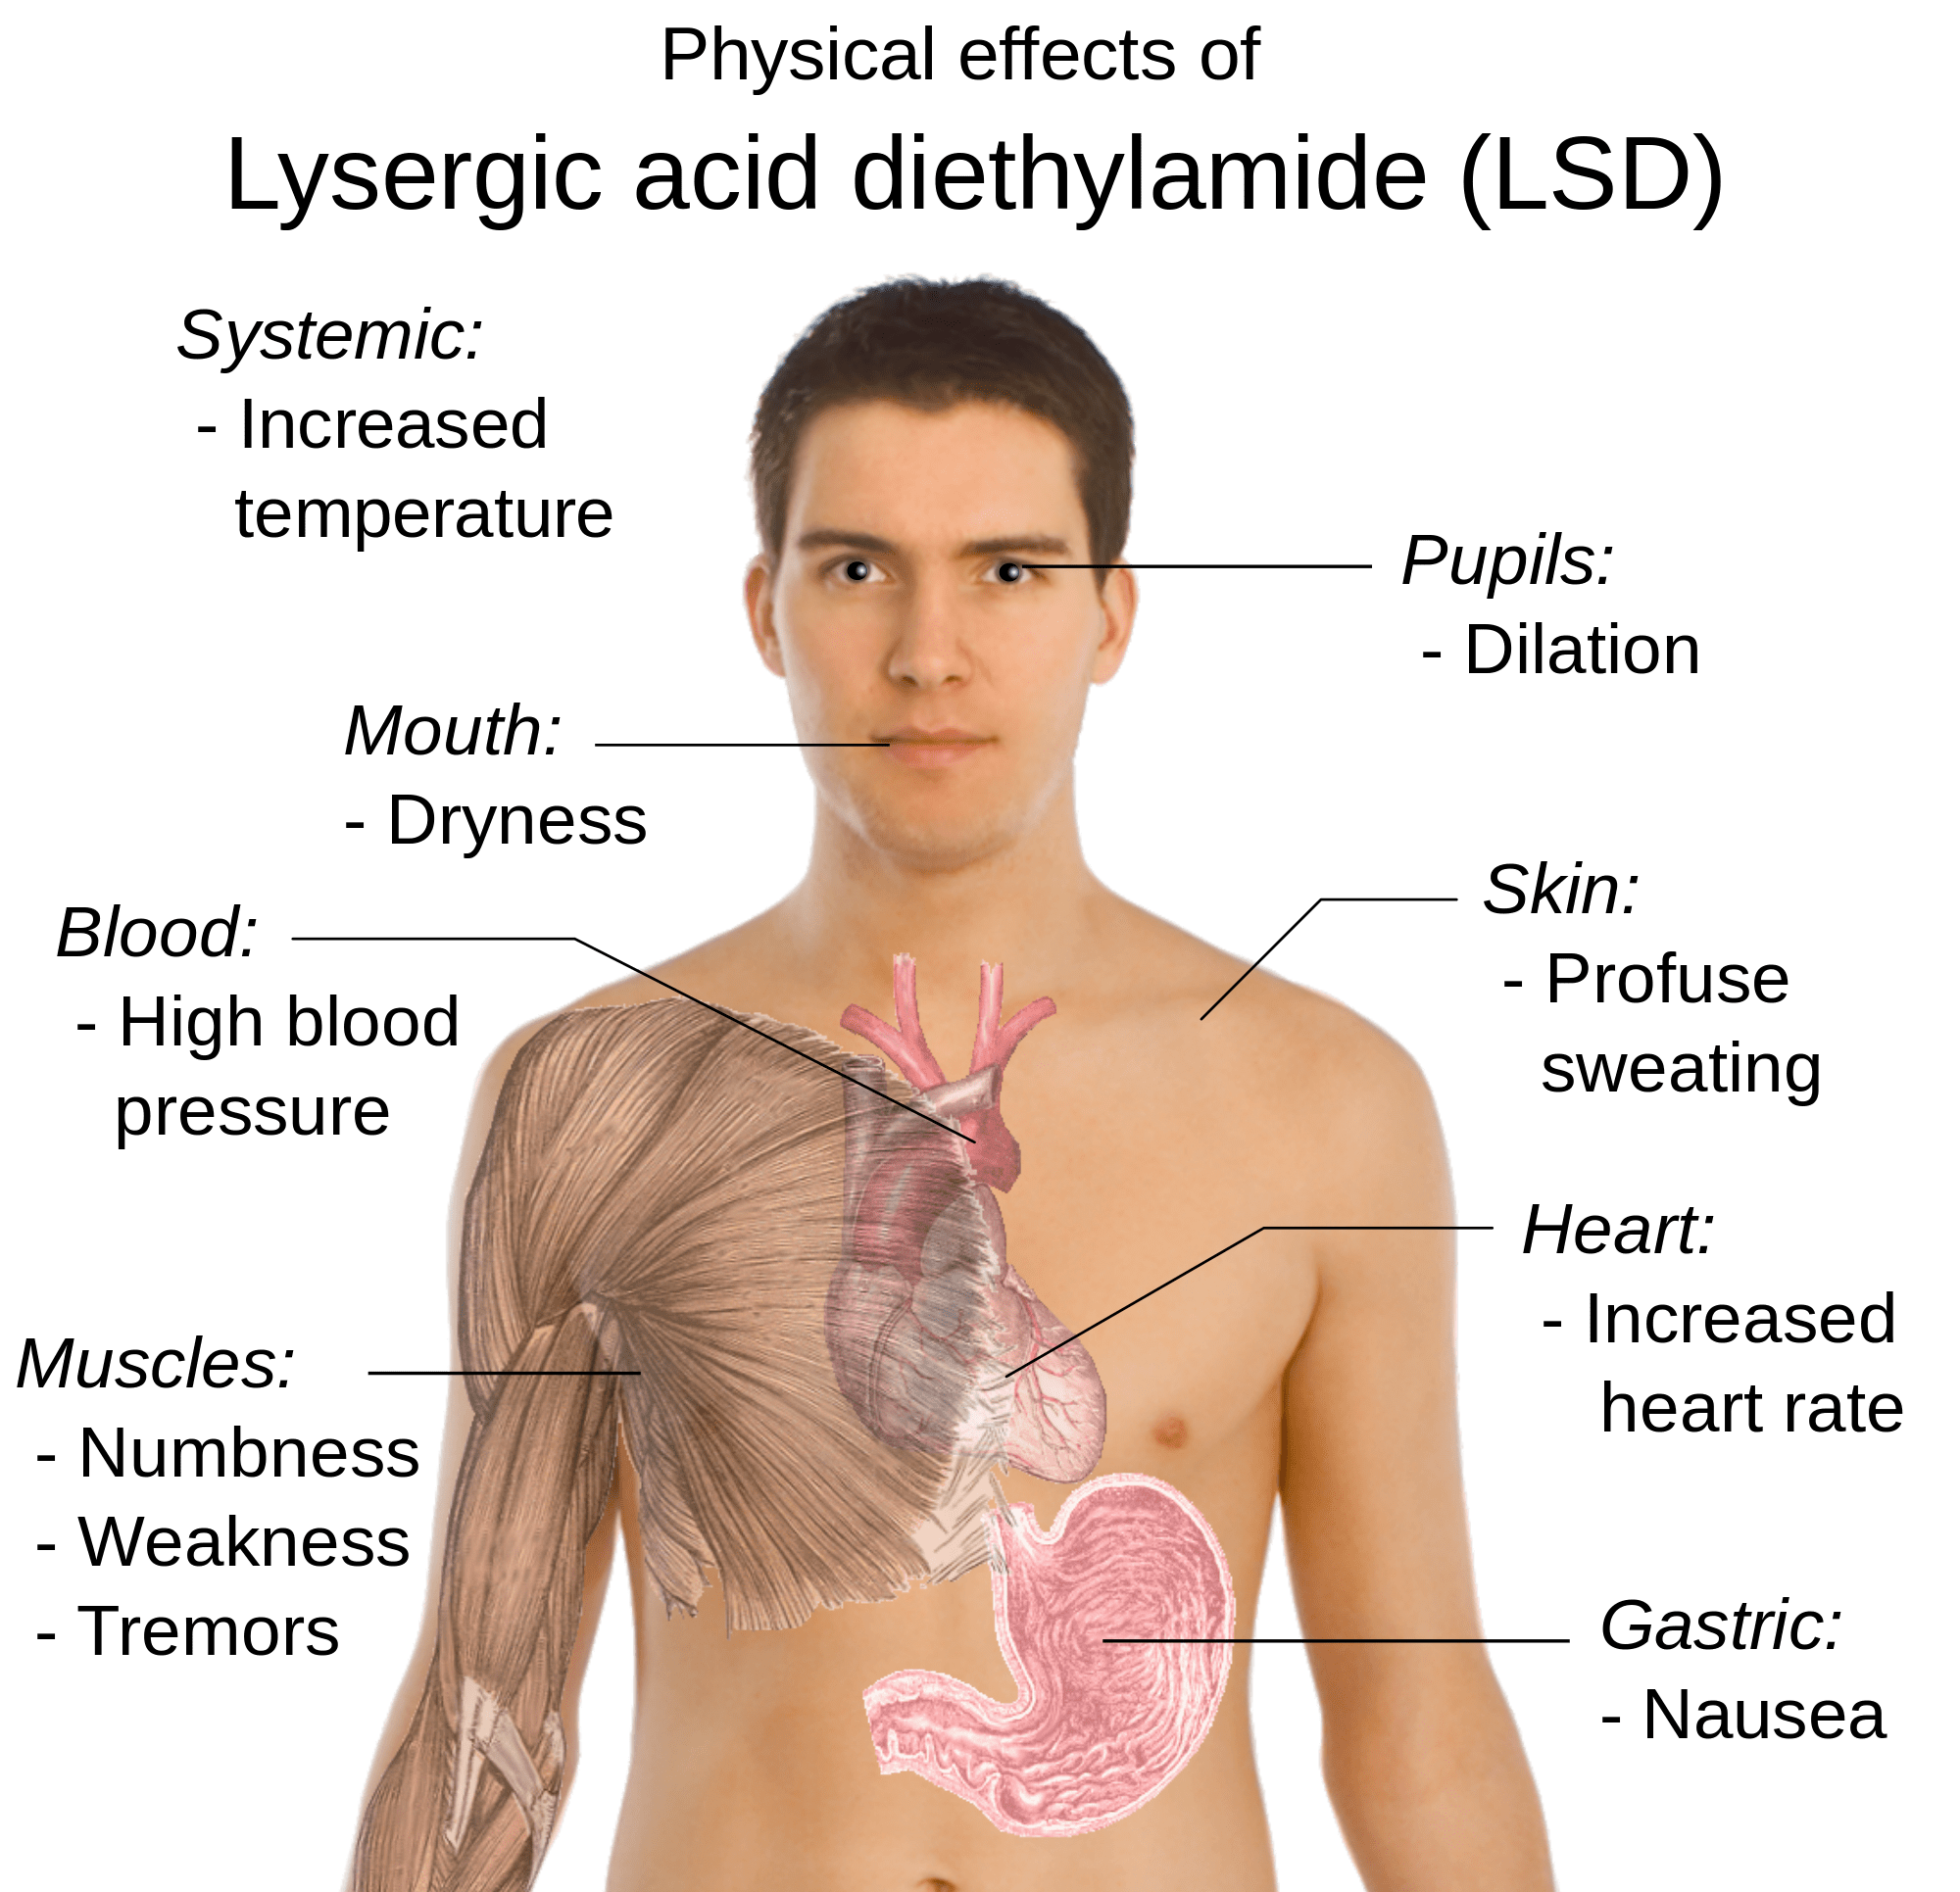 physical effects of LSD